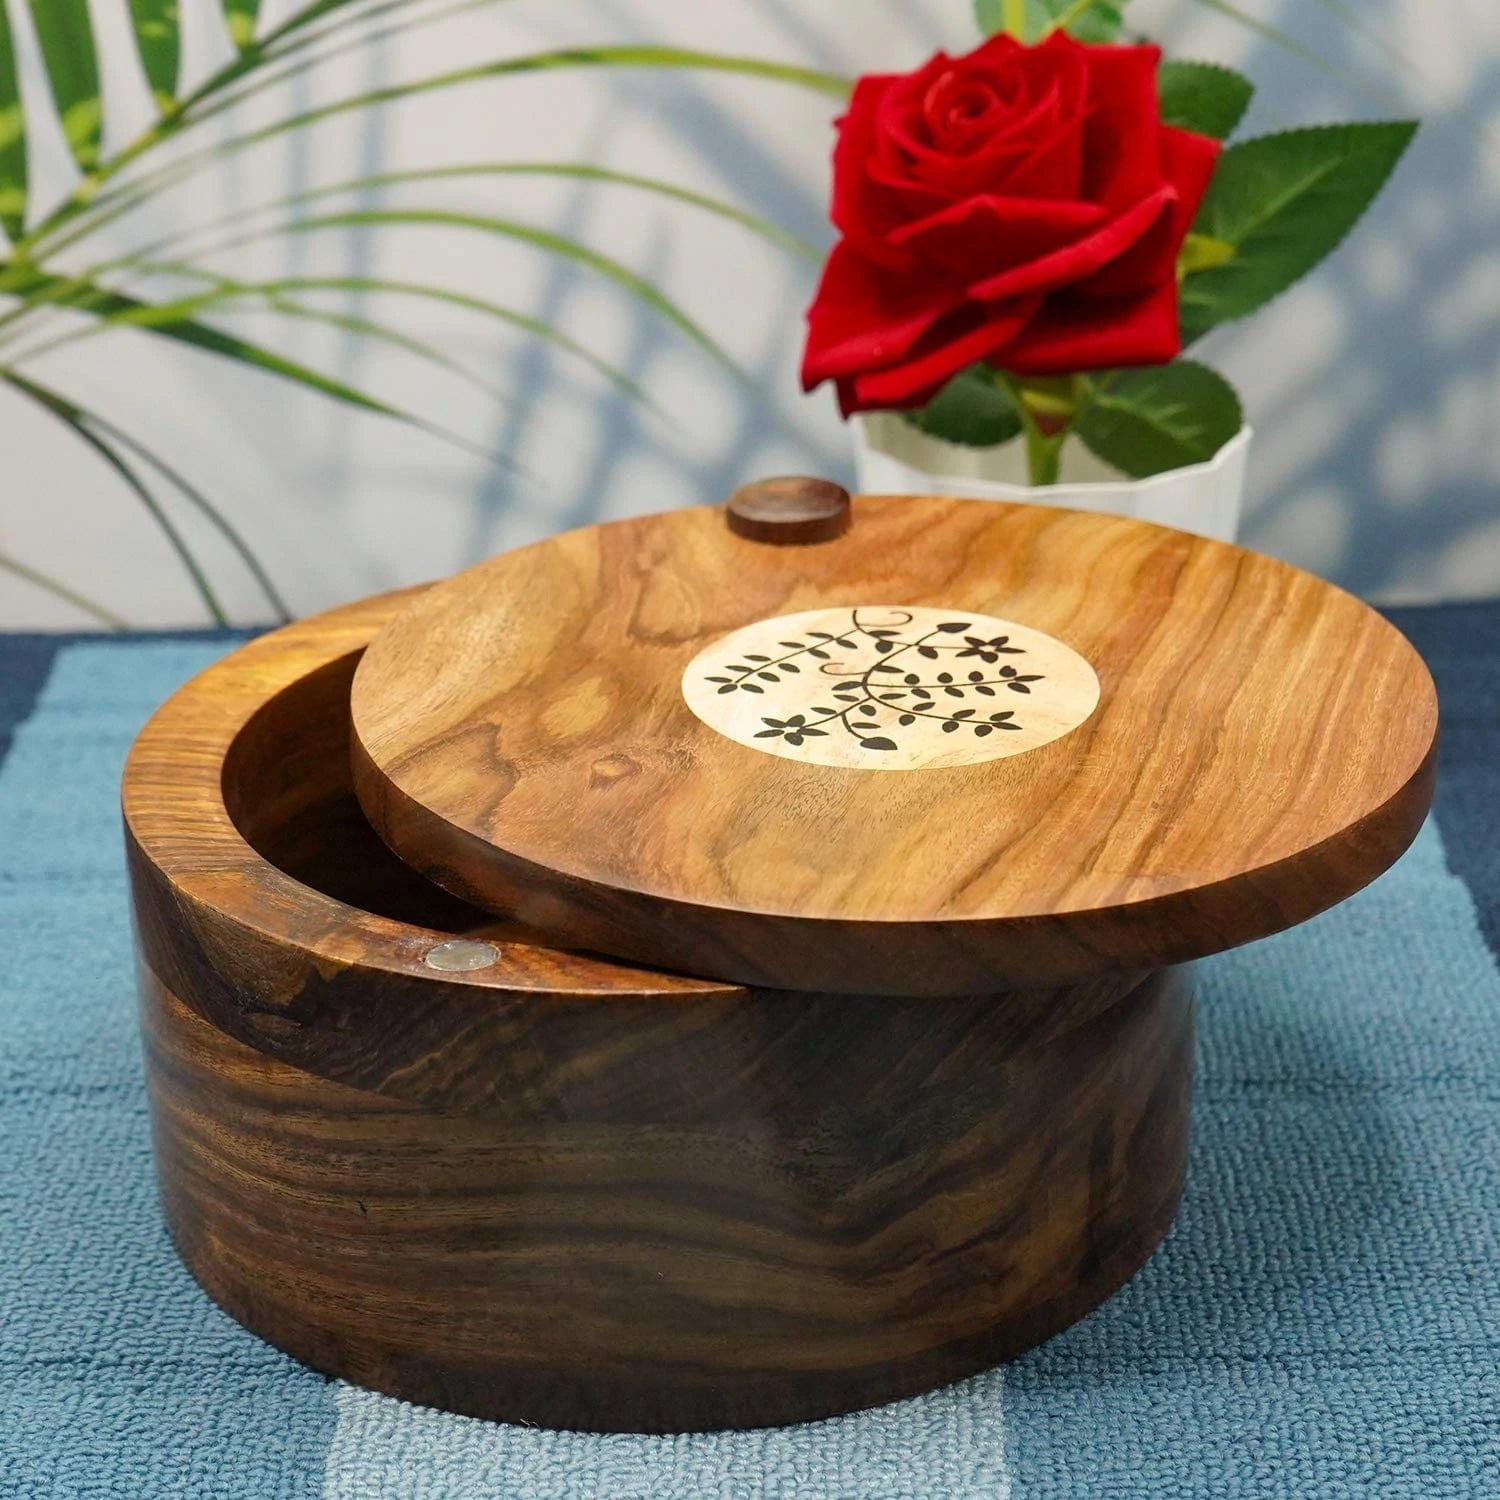 SHEESHAM WOOD CHAPATI BOX, WOODEN HOT POT ROTI DABBA WITH LID, ROTI STORAGE SERVER BASKET, CONTAINER FOR KITCHEN